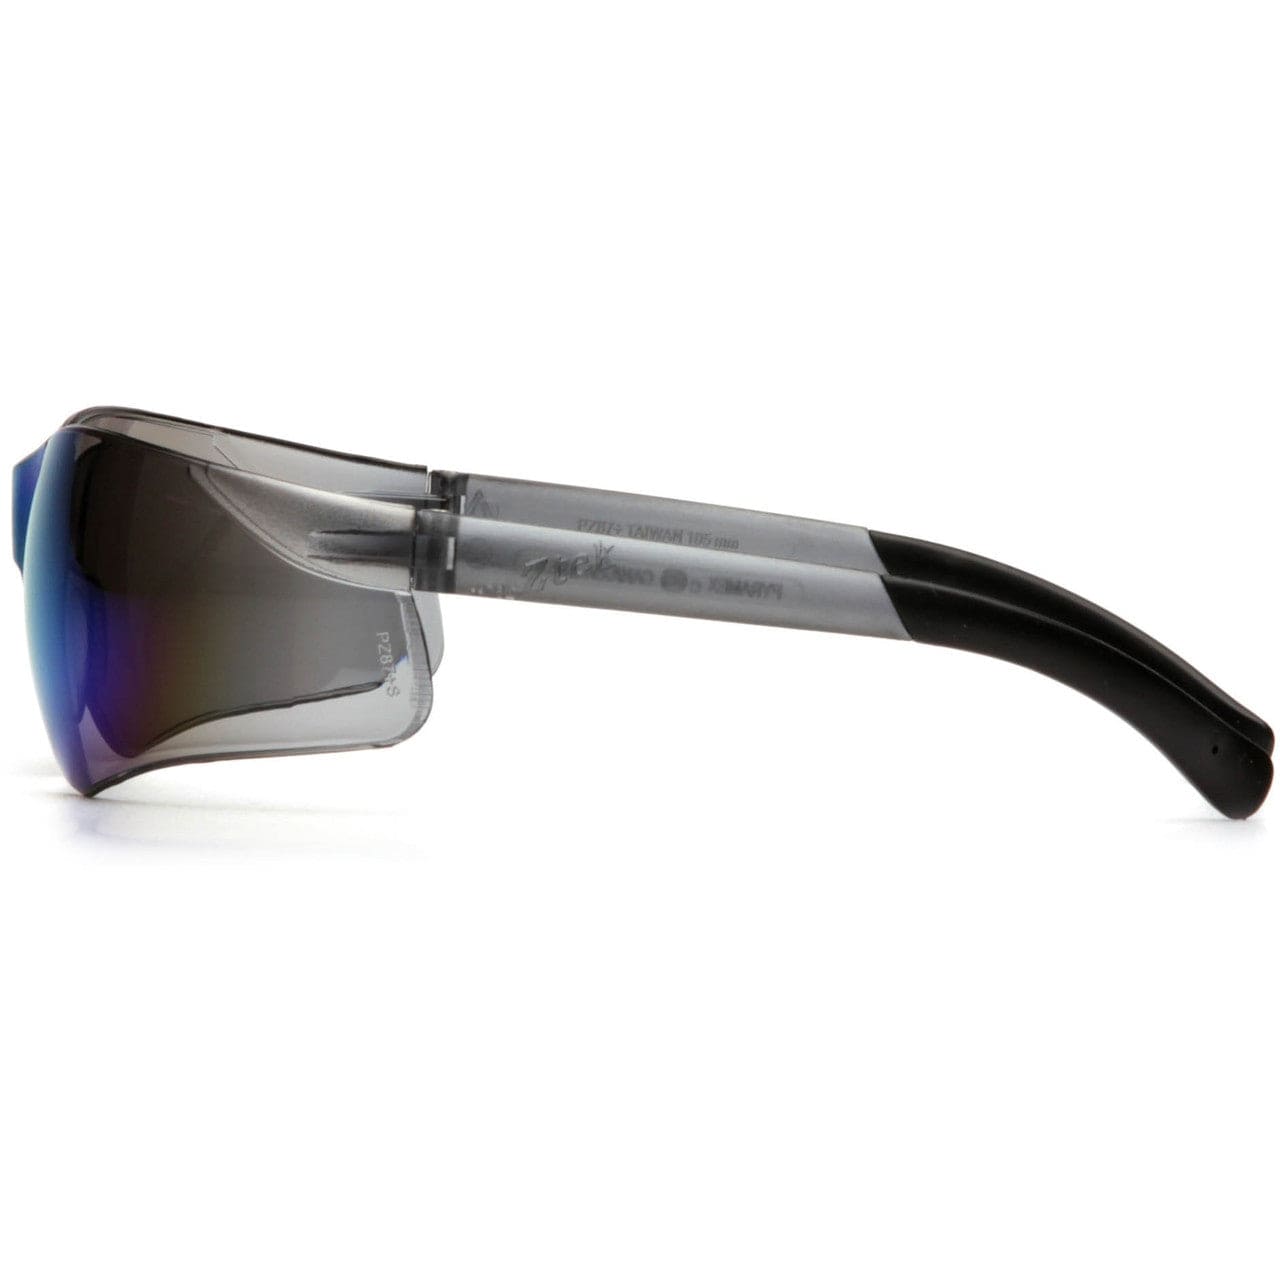 Pyramex Ztek Safety Glasses with Gold Mirror Lens S2590S Side View